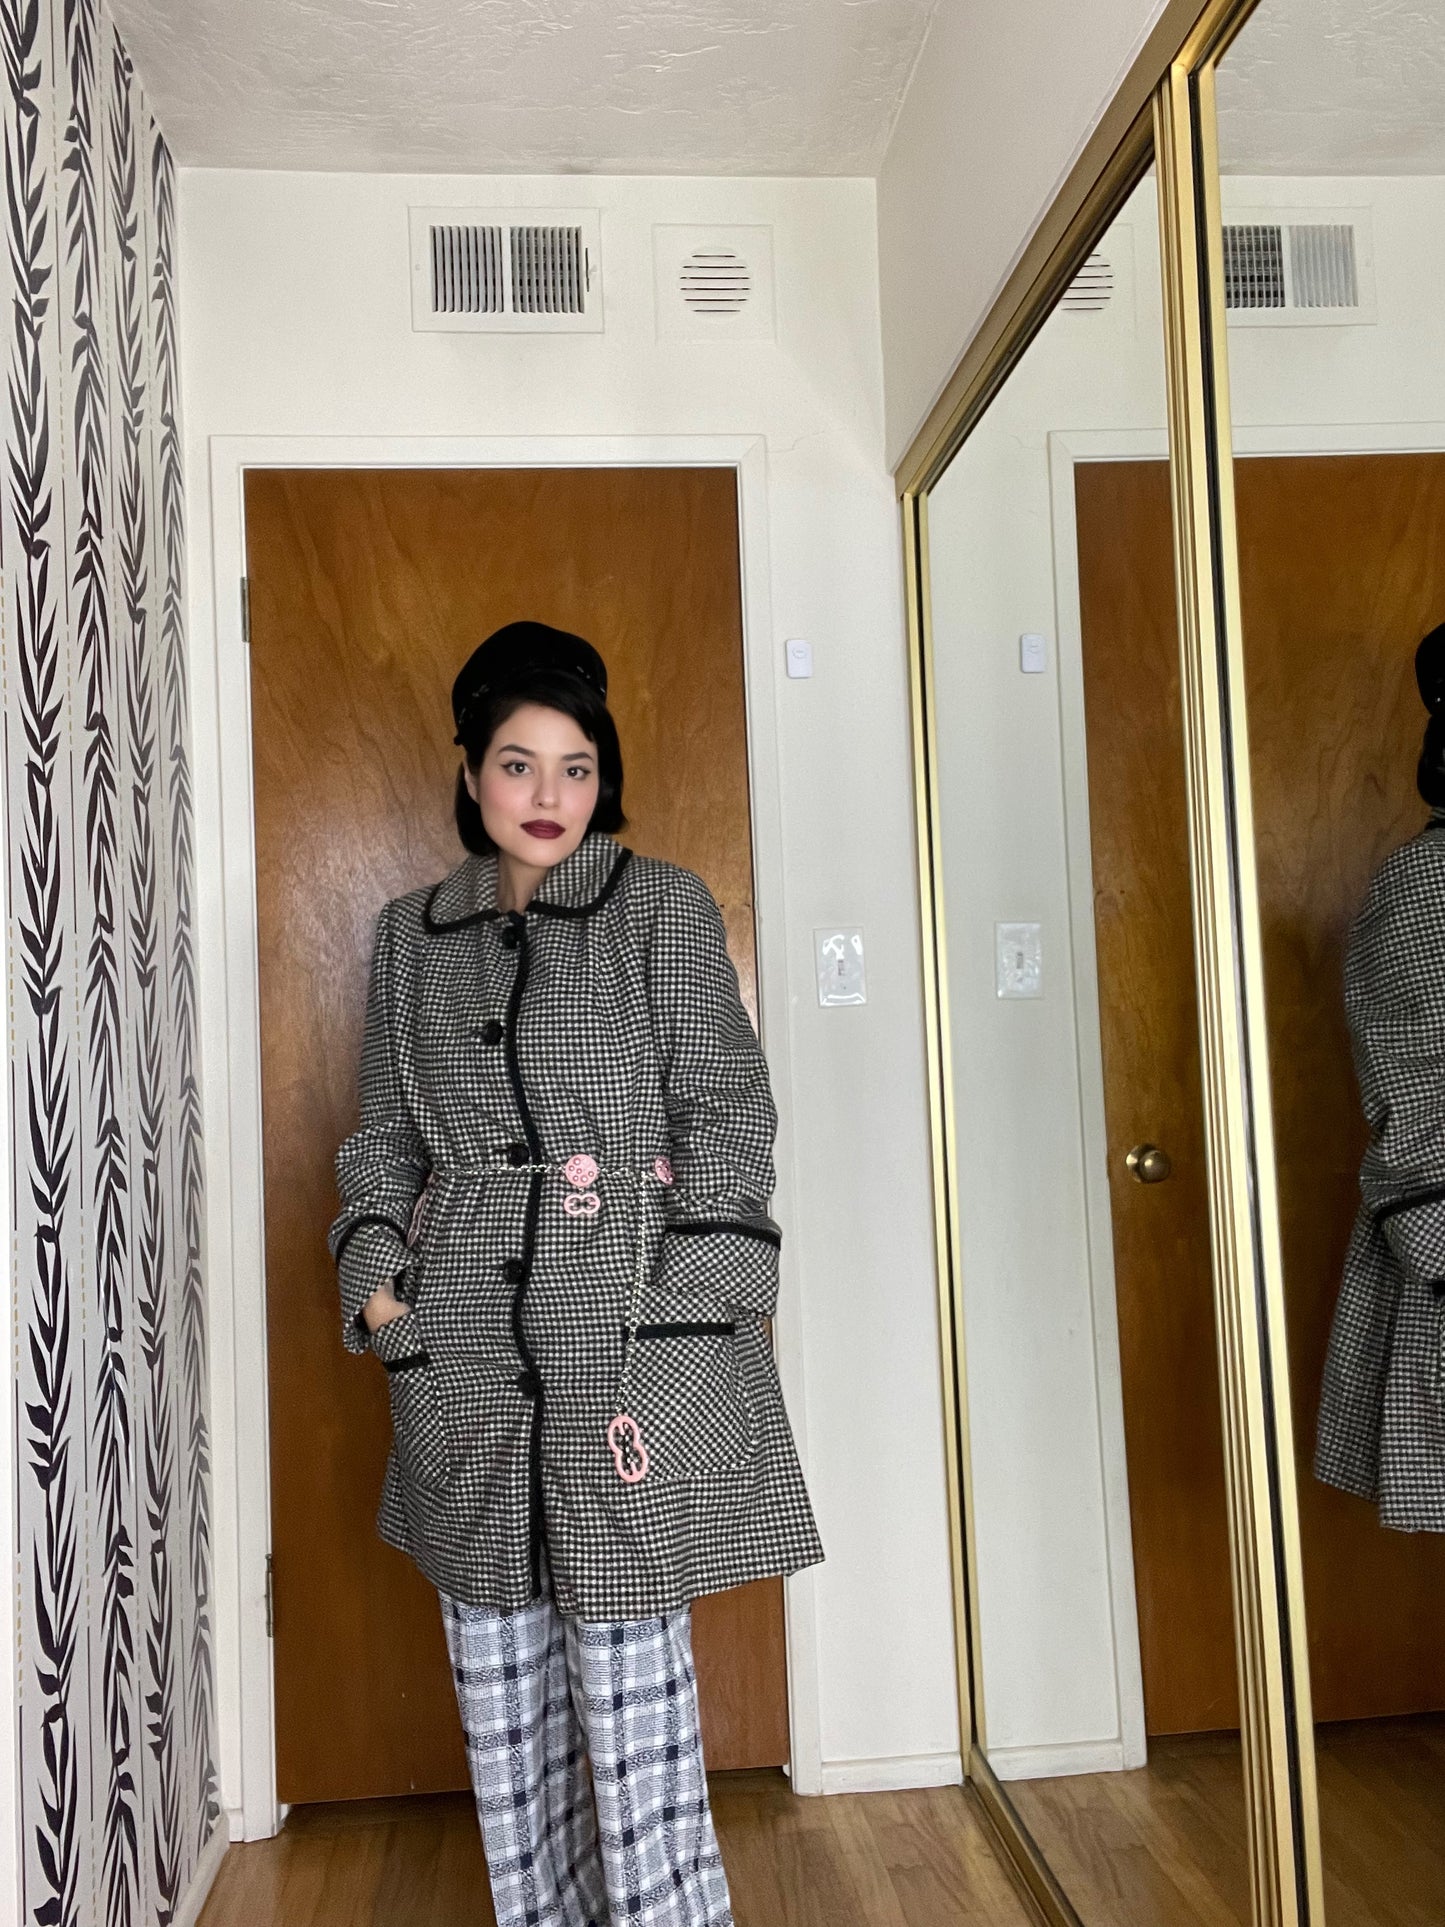 Vintage 50s 60s “Sears Fashions” Black and White Gingham Swing Style Coat with Rounded Collar Fits Most Sizes